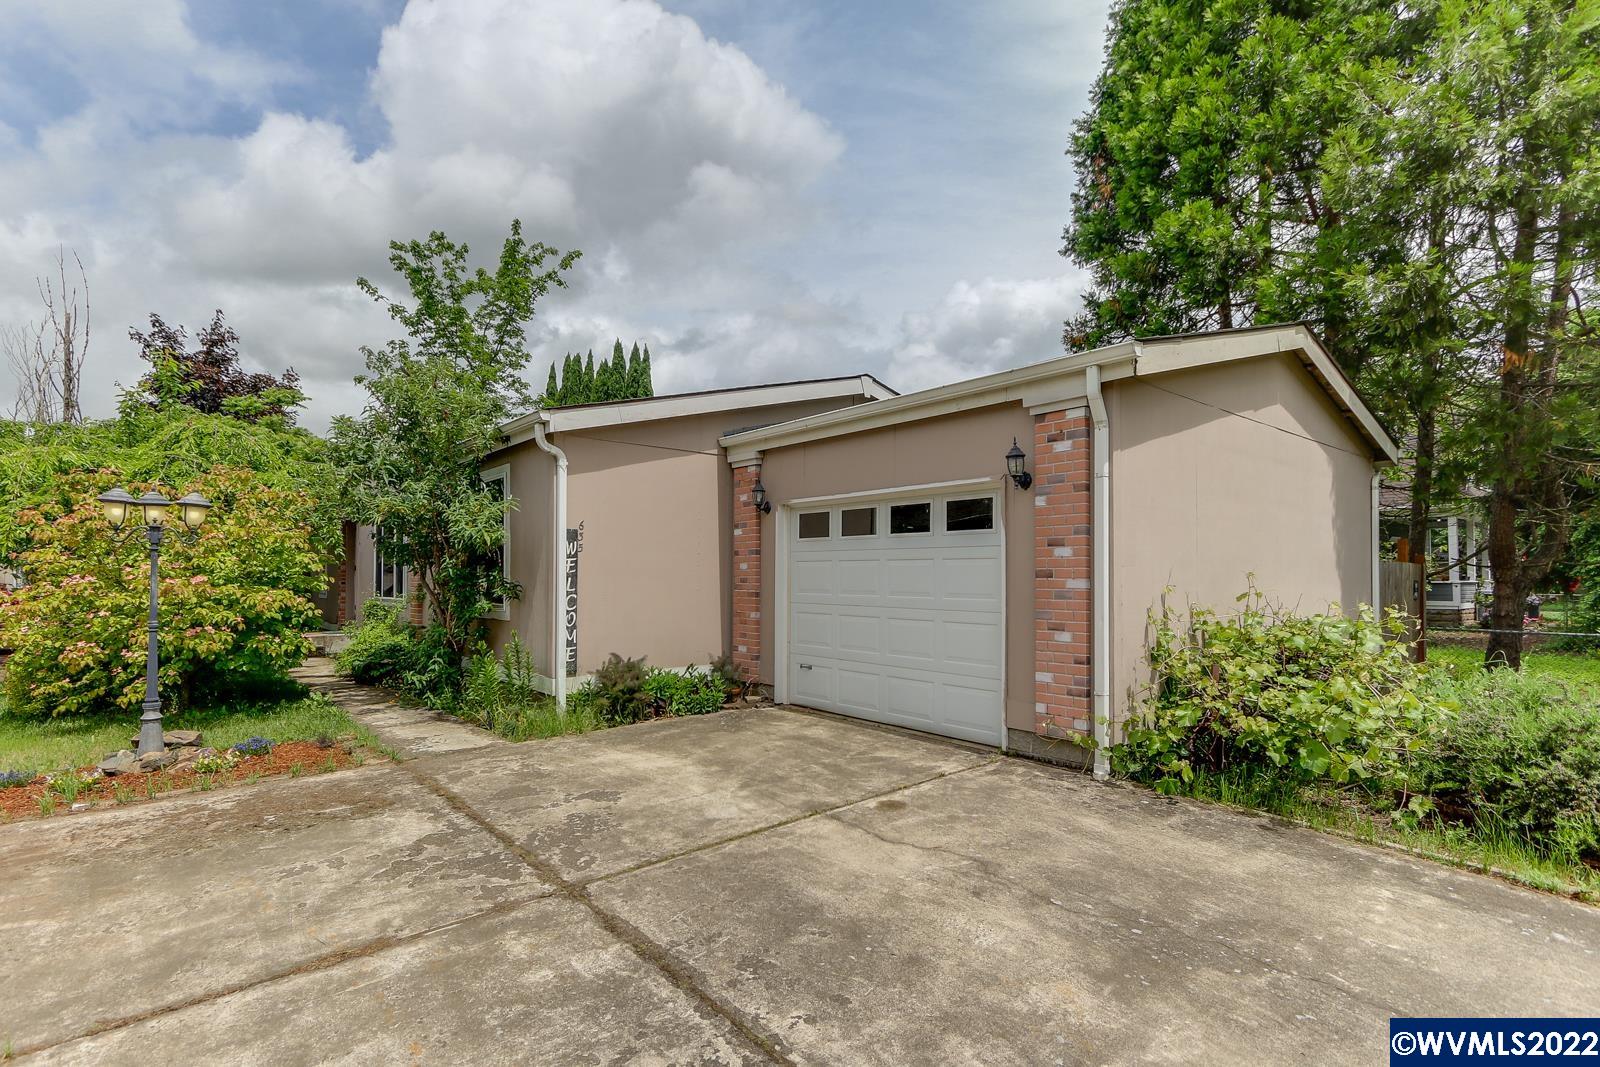 Nice & cozy home on own lot. Fresh interior paint, soaker tub, eat bar, single car garage. Includes all kitchen appliances. Central air and heat. Two decks, one off kitchen, one in fenced back yard, has alley access with additional parking outside fence. Fig tree. Convenient to town and I-5 commute